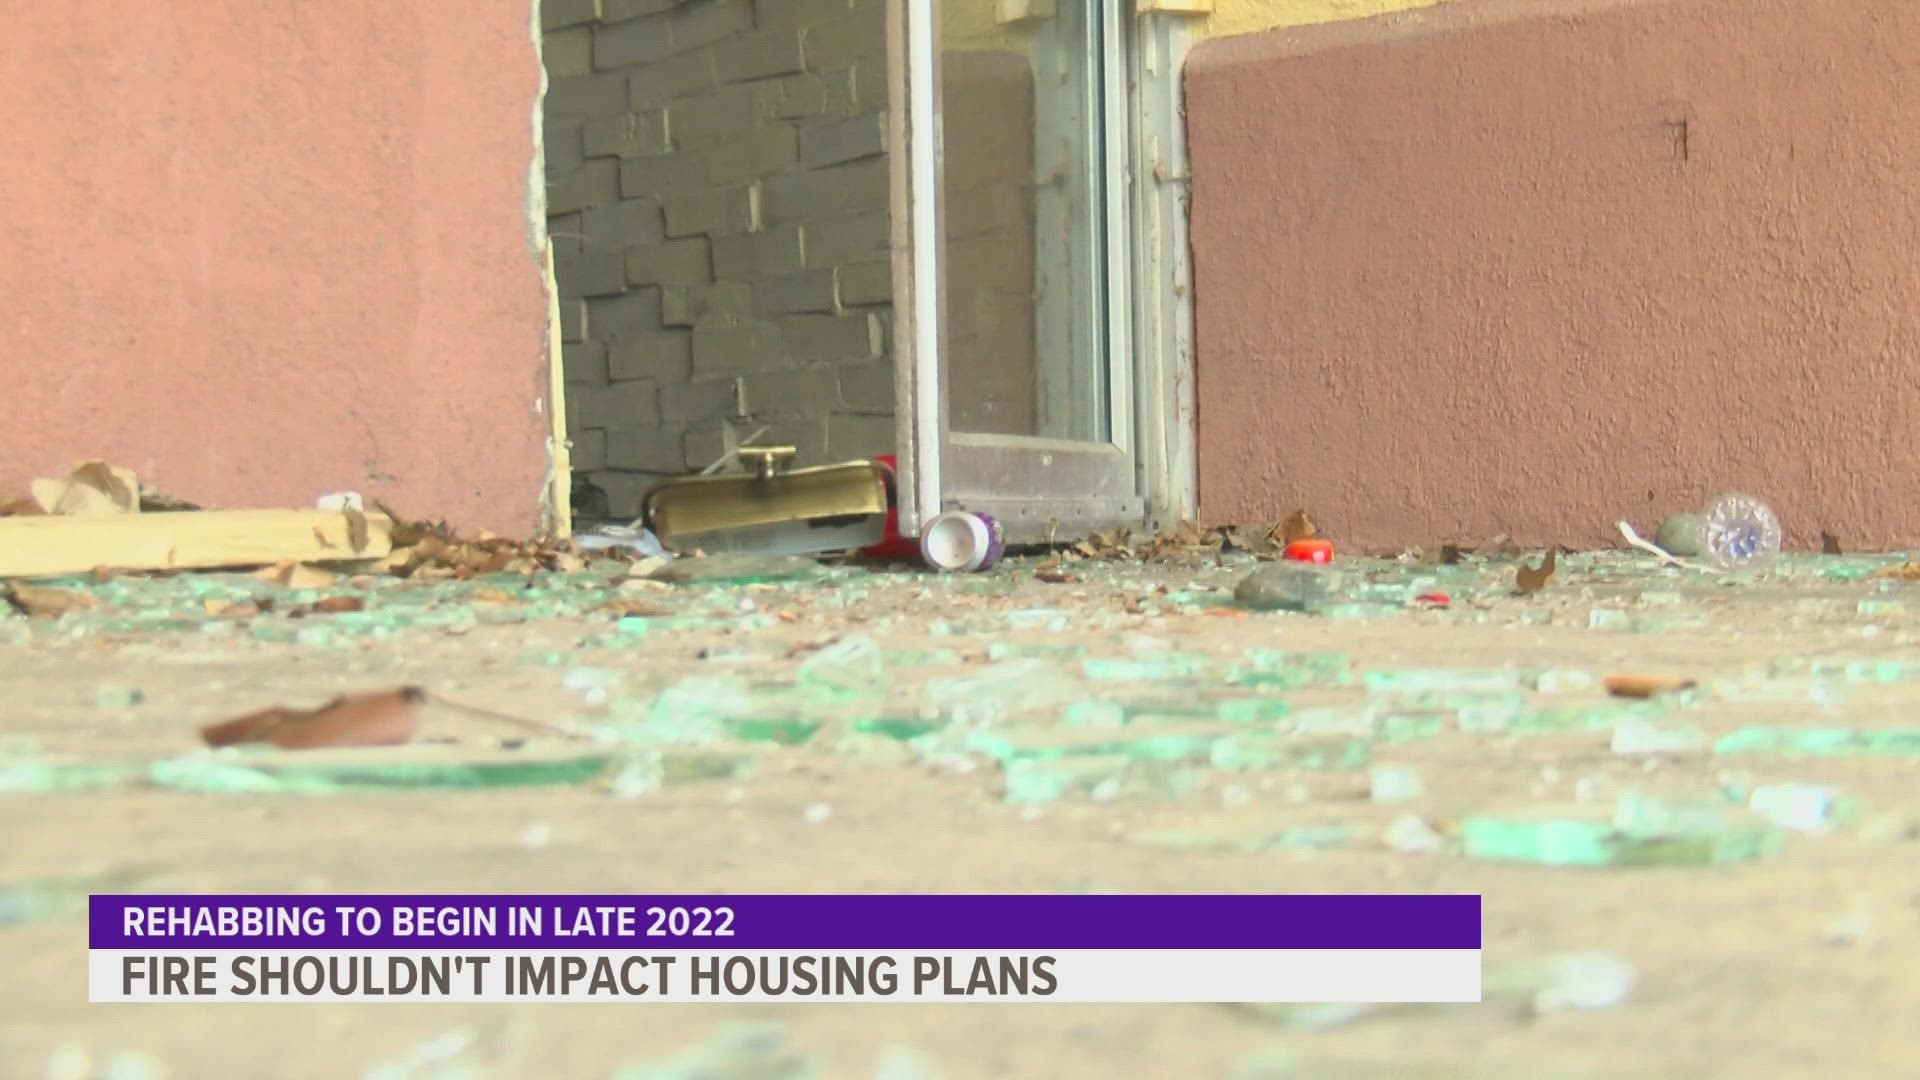 Greater Des Moines Supportive Housing says they intend to begin rehabbing the inn in late 2022.